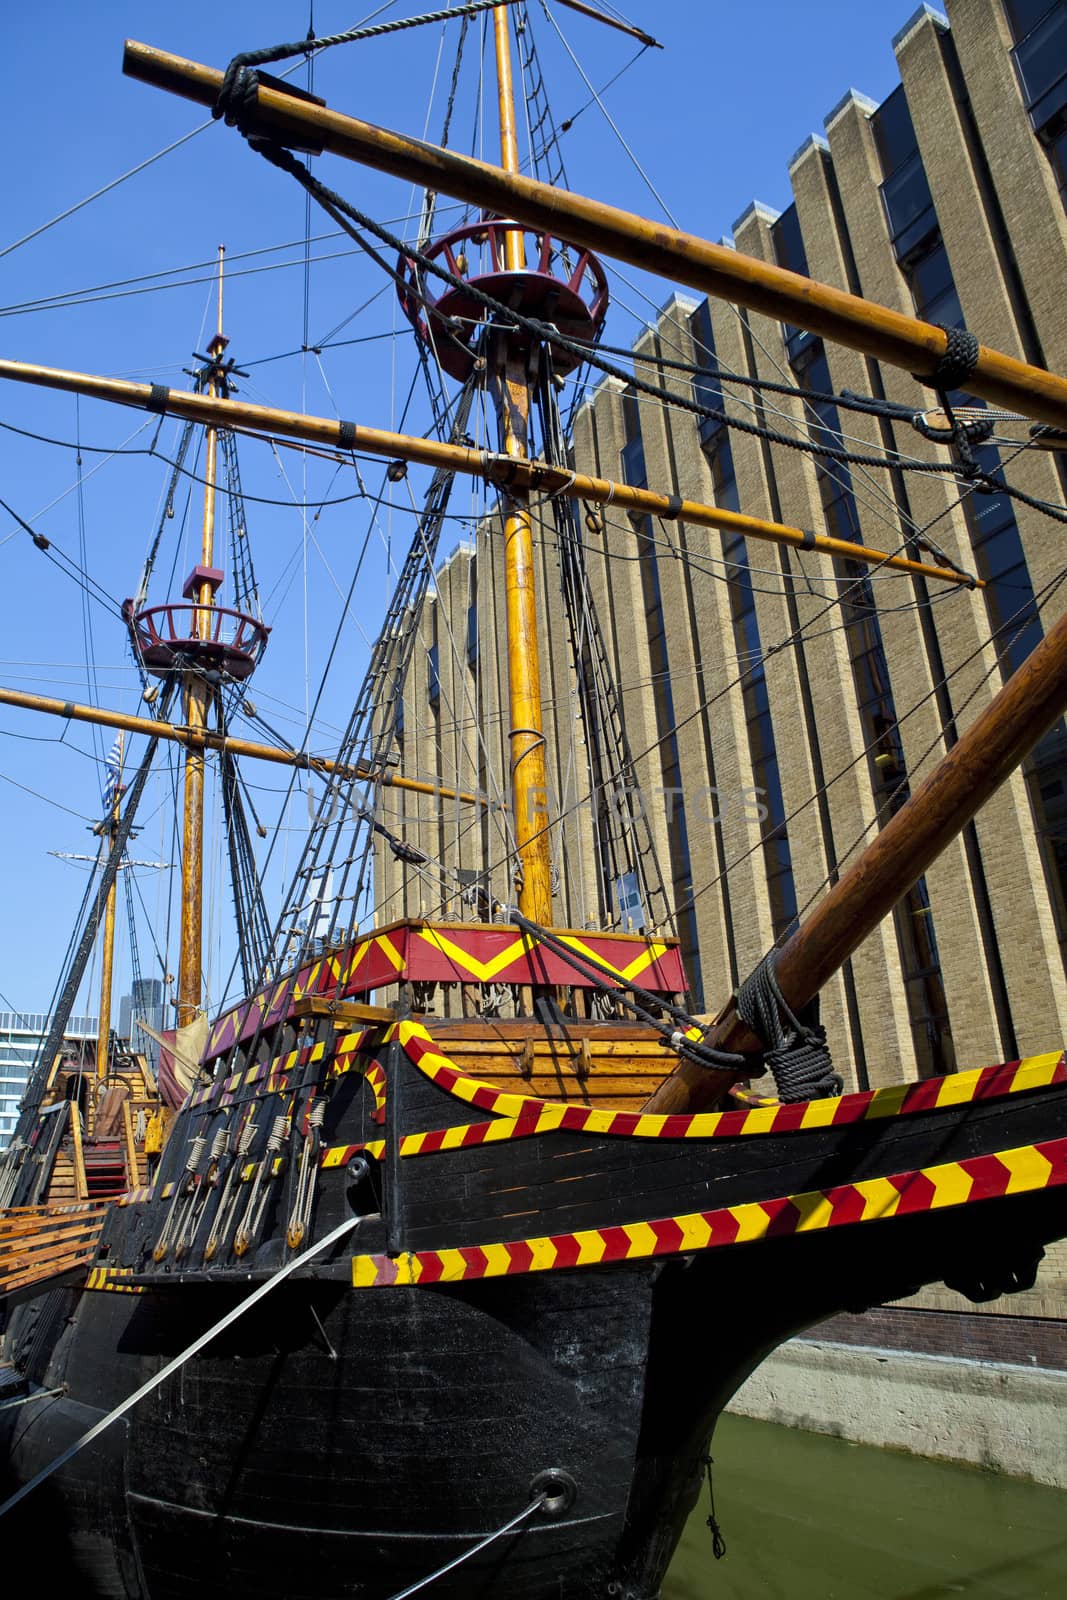 The Golden Hind Galleon Ship in London by chrisdorney